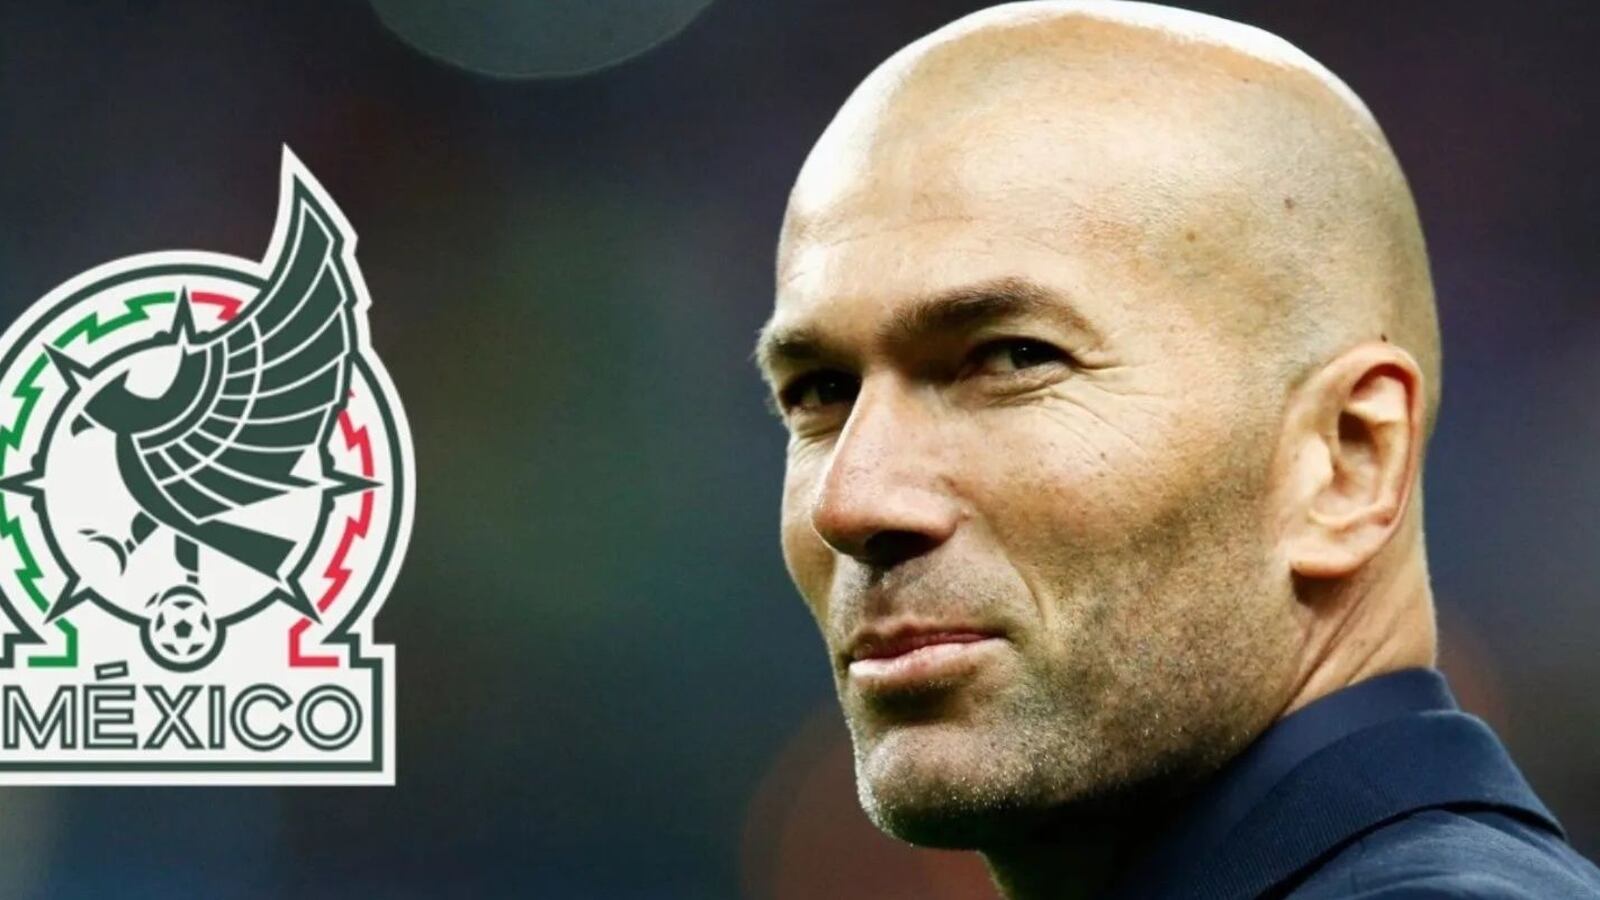 Welcome to Mexico Zidane, the condition he put to work with the National Team